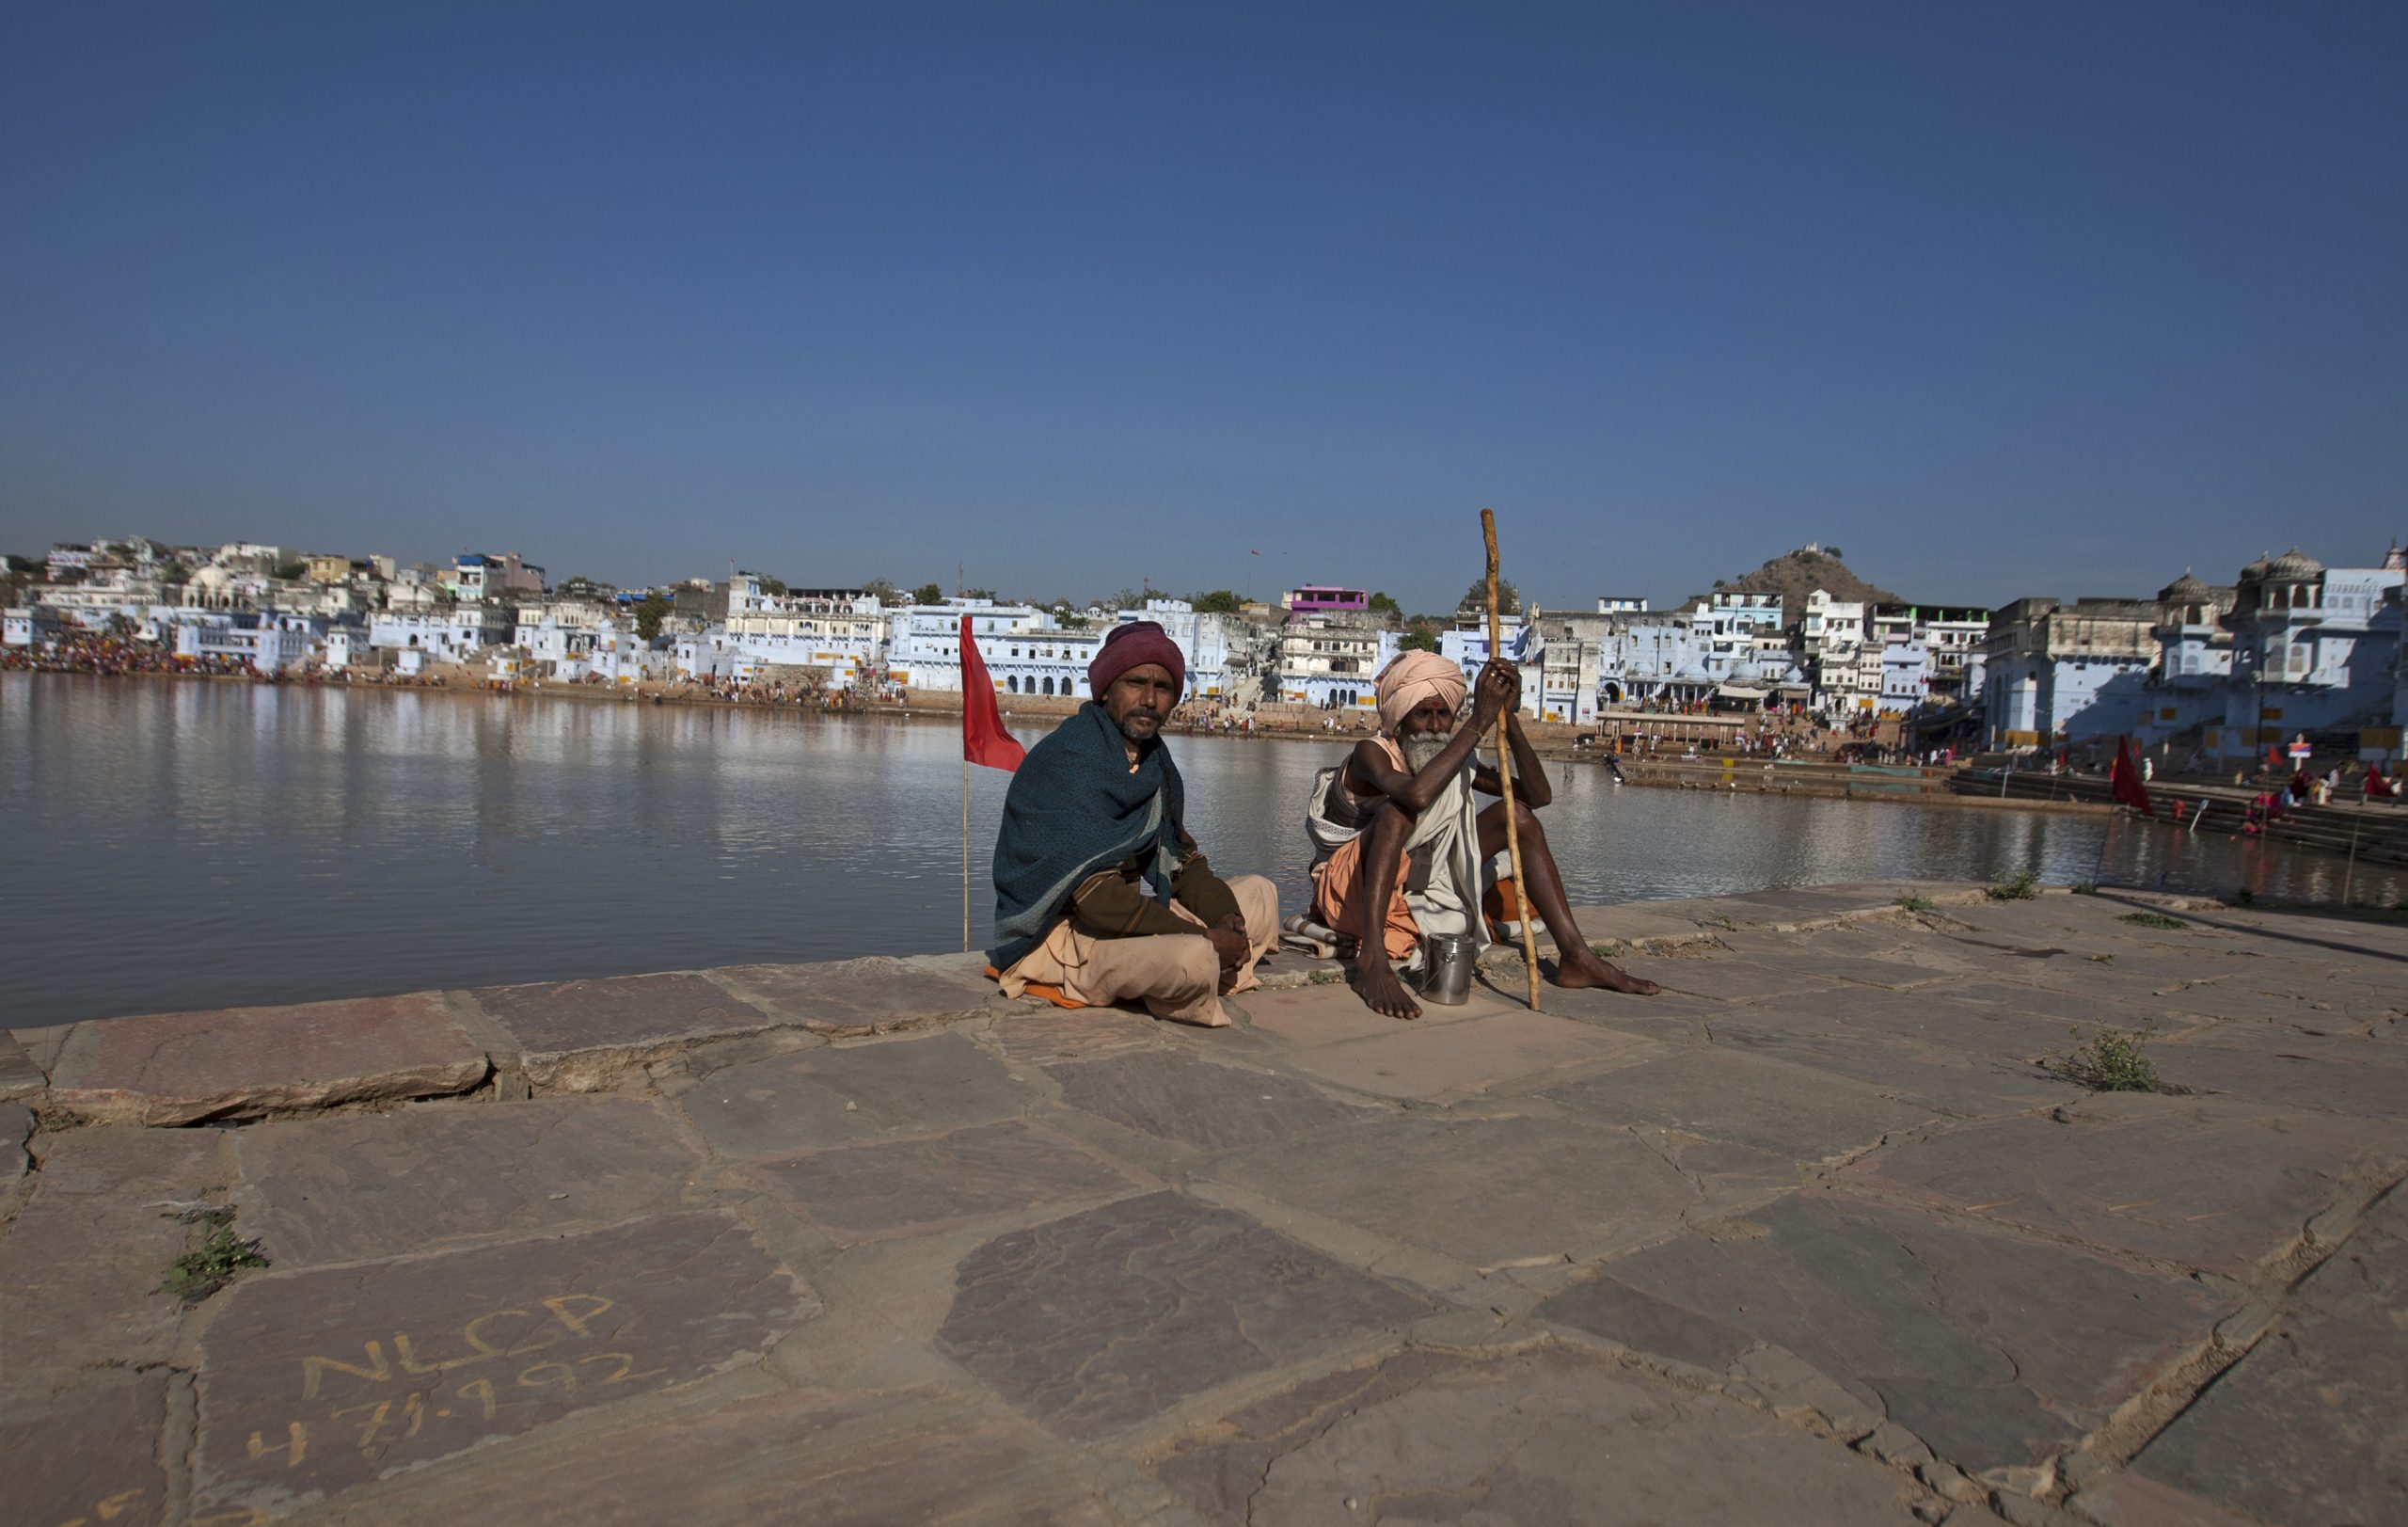 Hire Go Rajasthan Travel for Pushkar Trip in Awesome Price